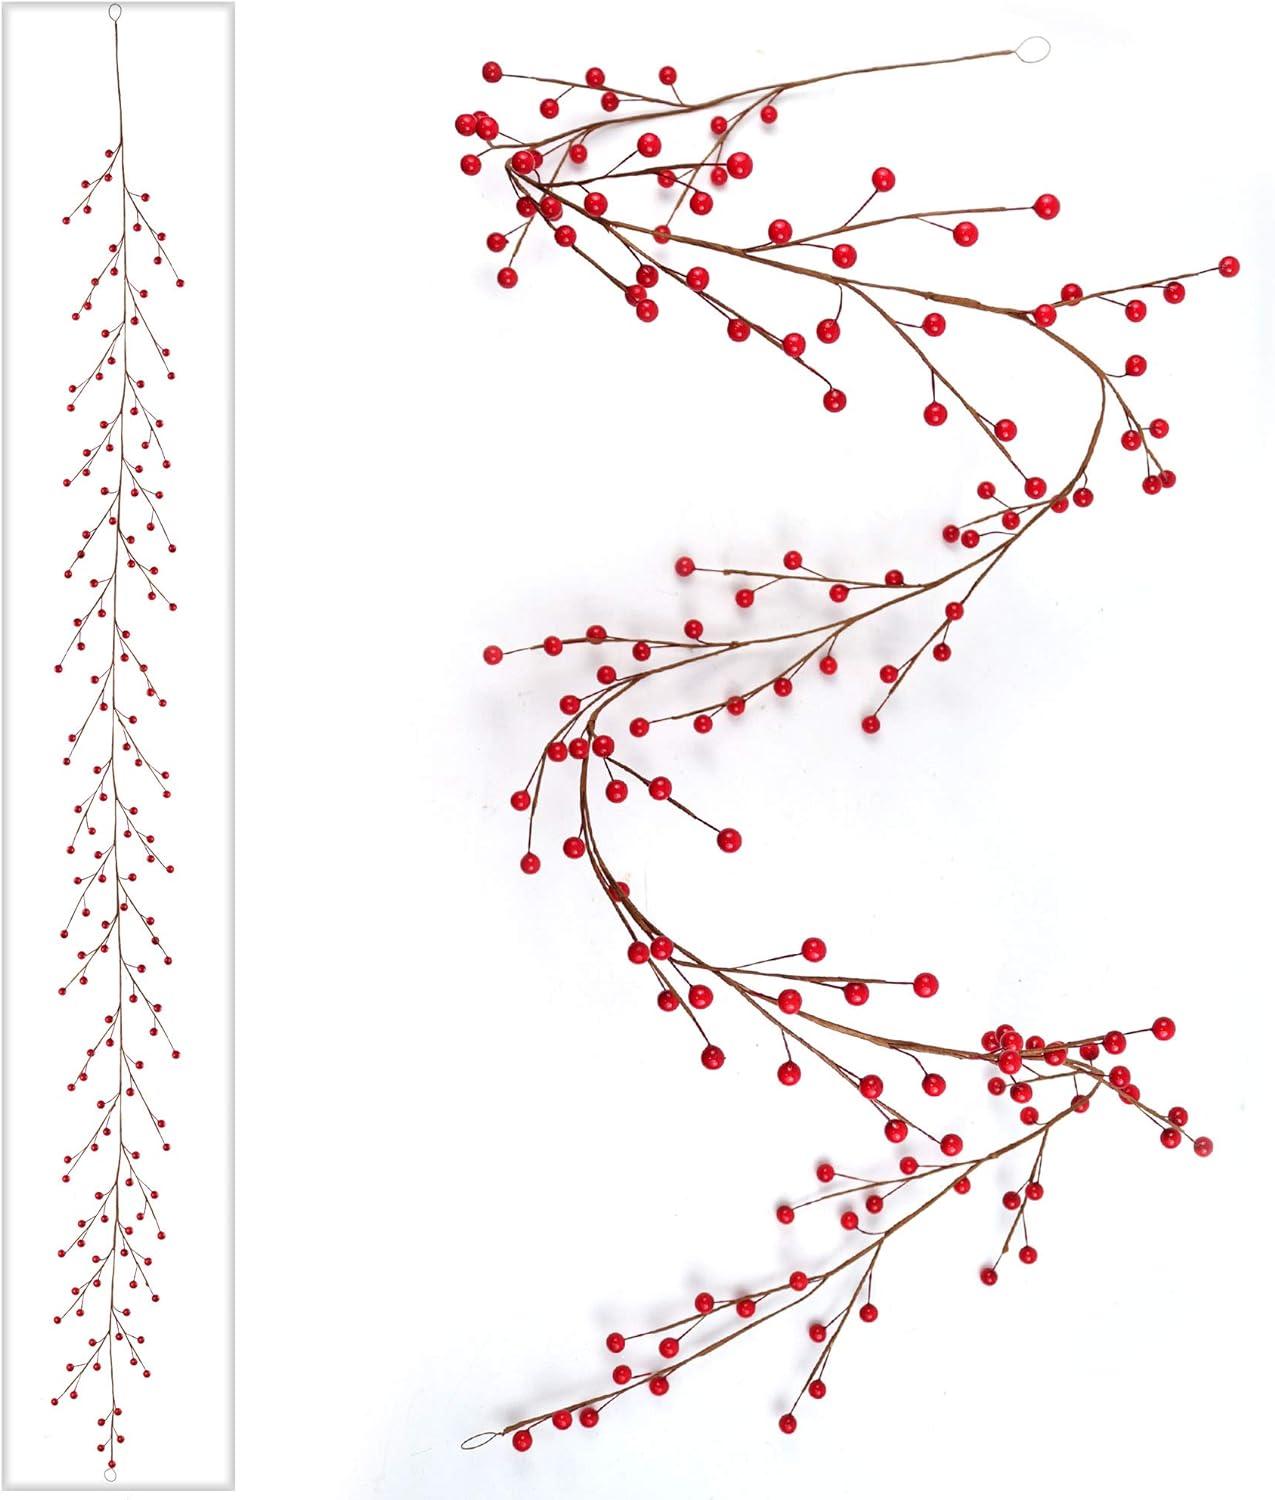 150 Bright Red Berry Christmas Garland - Perfect for Holiday Mantels, Wreaths, & Tree Decorations